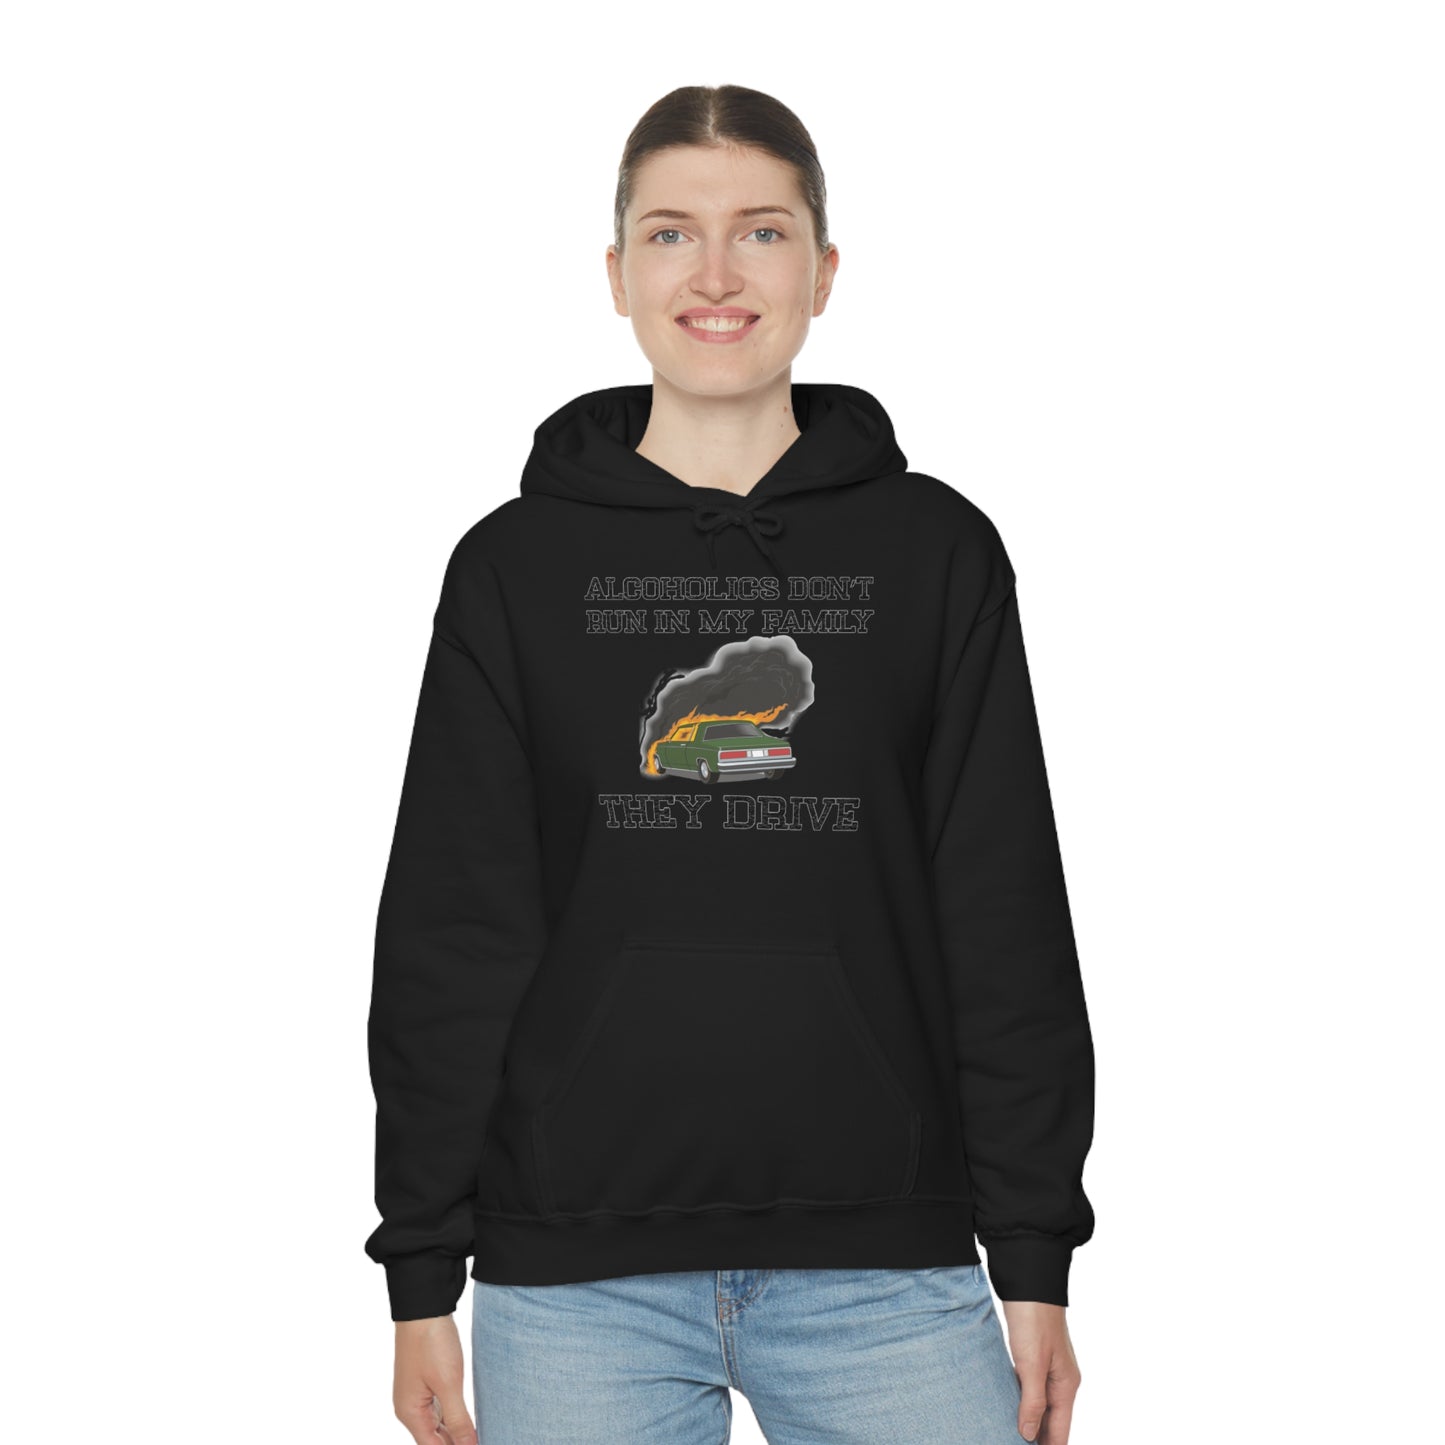 An Alcoholic's Journey Hoodie™